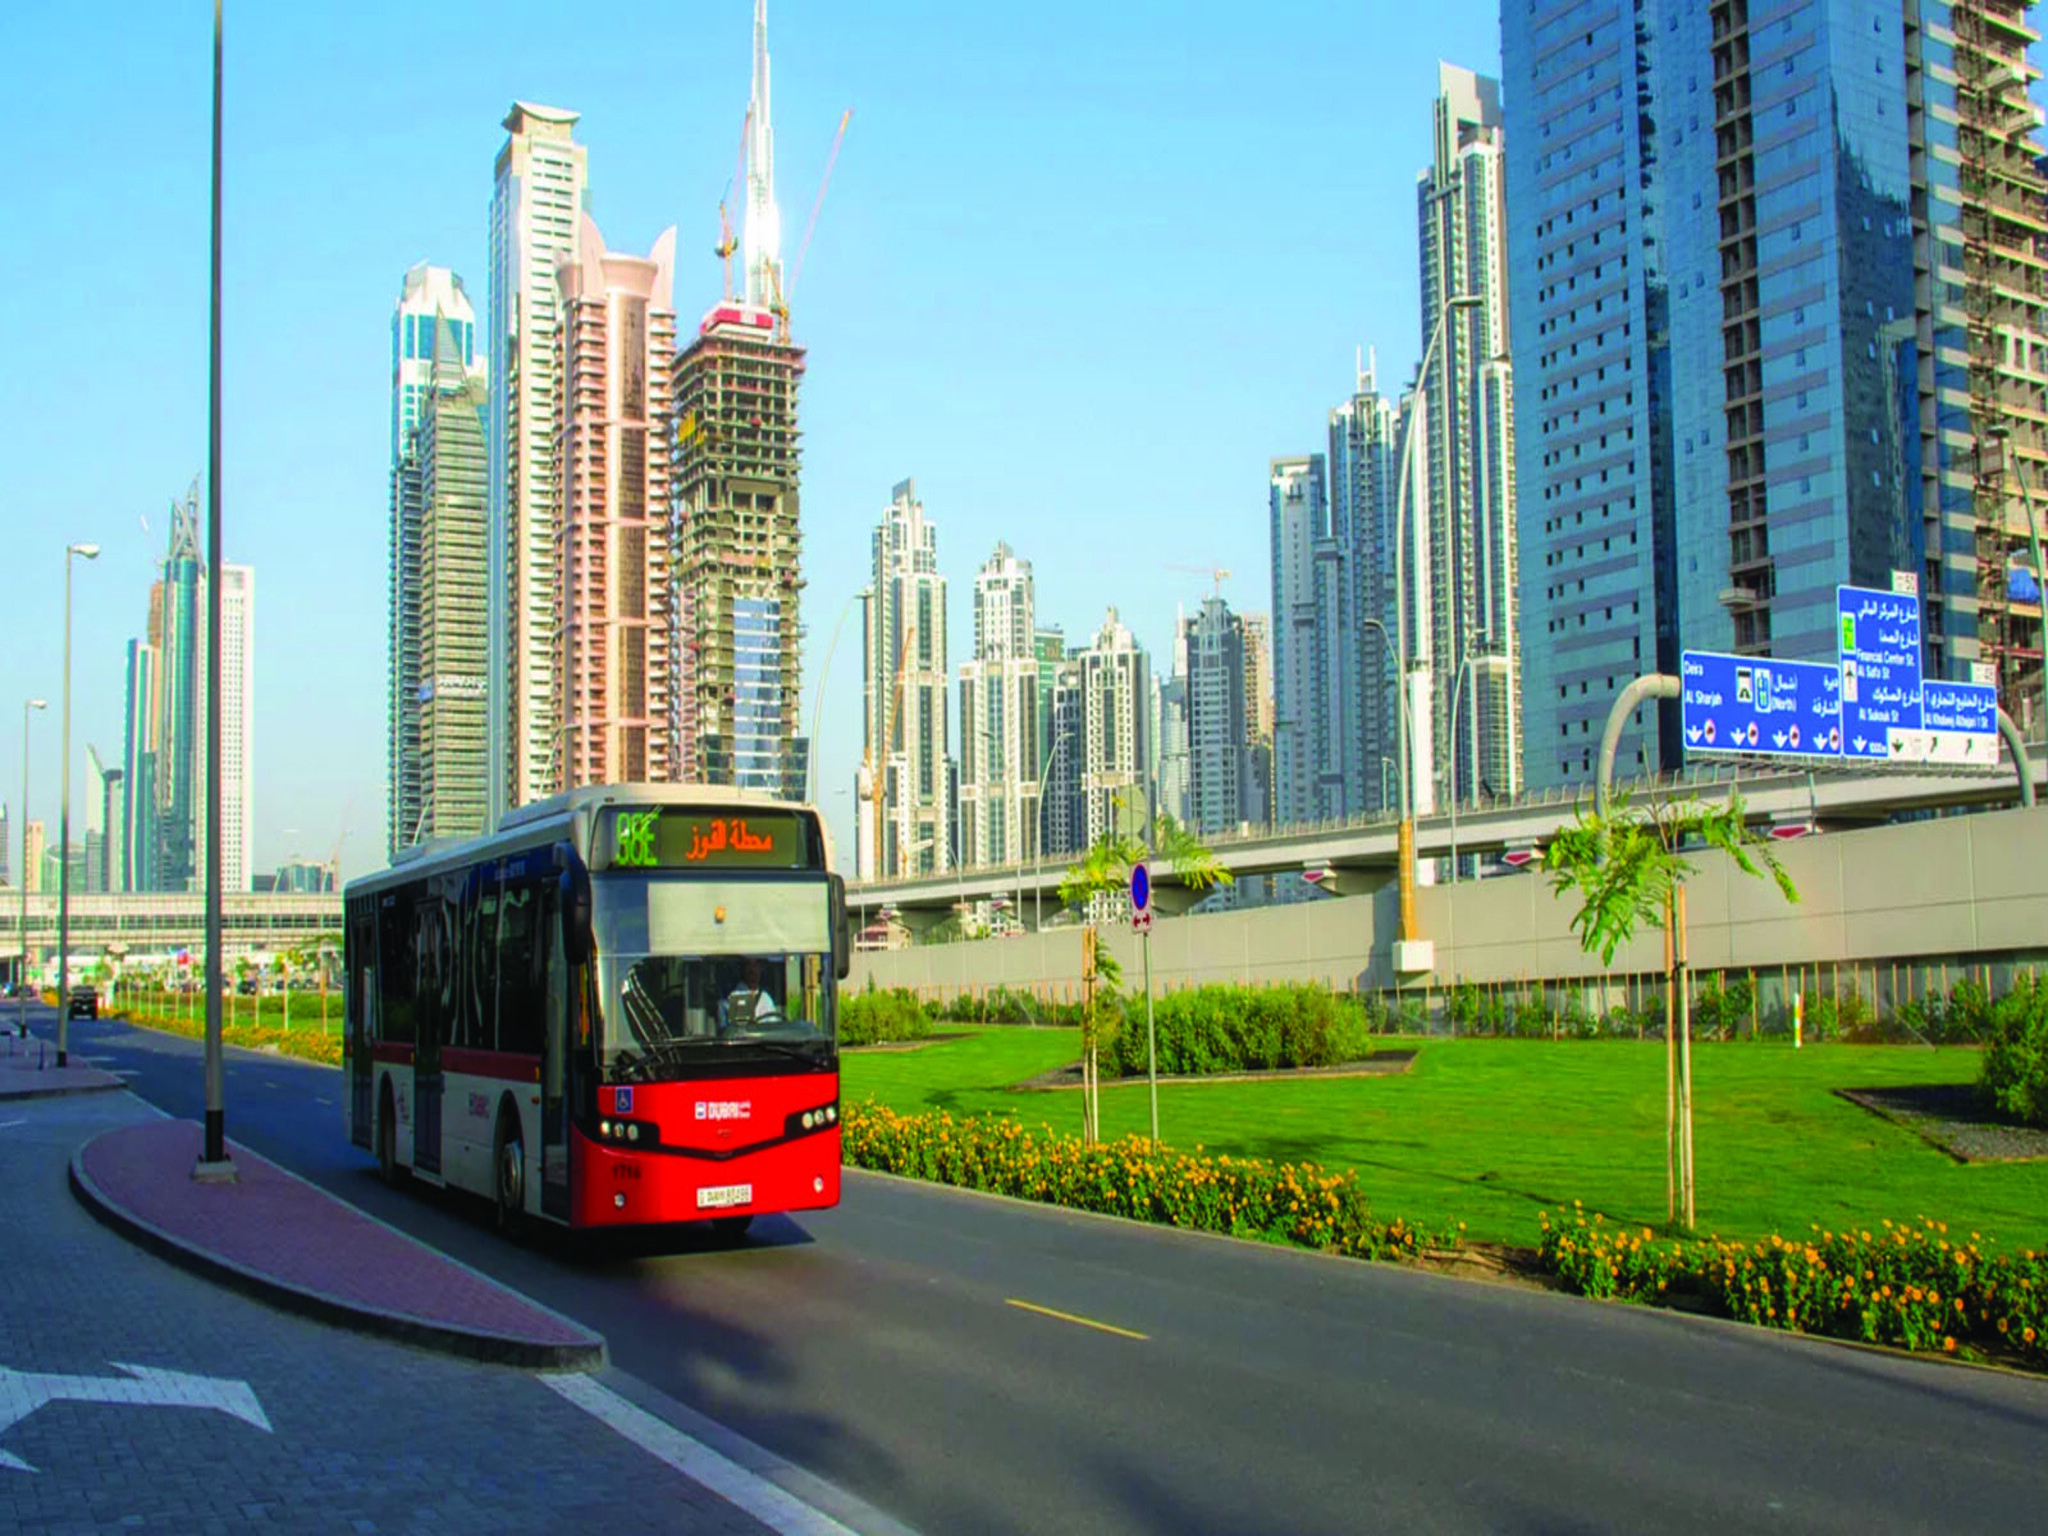 Dubai Roads issues an important decision regarding bus routes during the Eid Al Fitr holiday